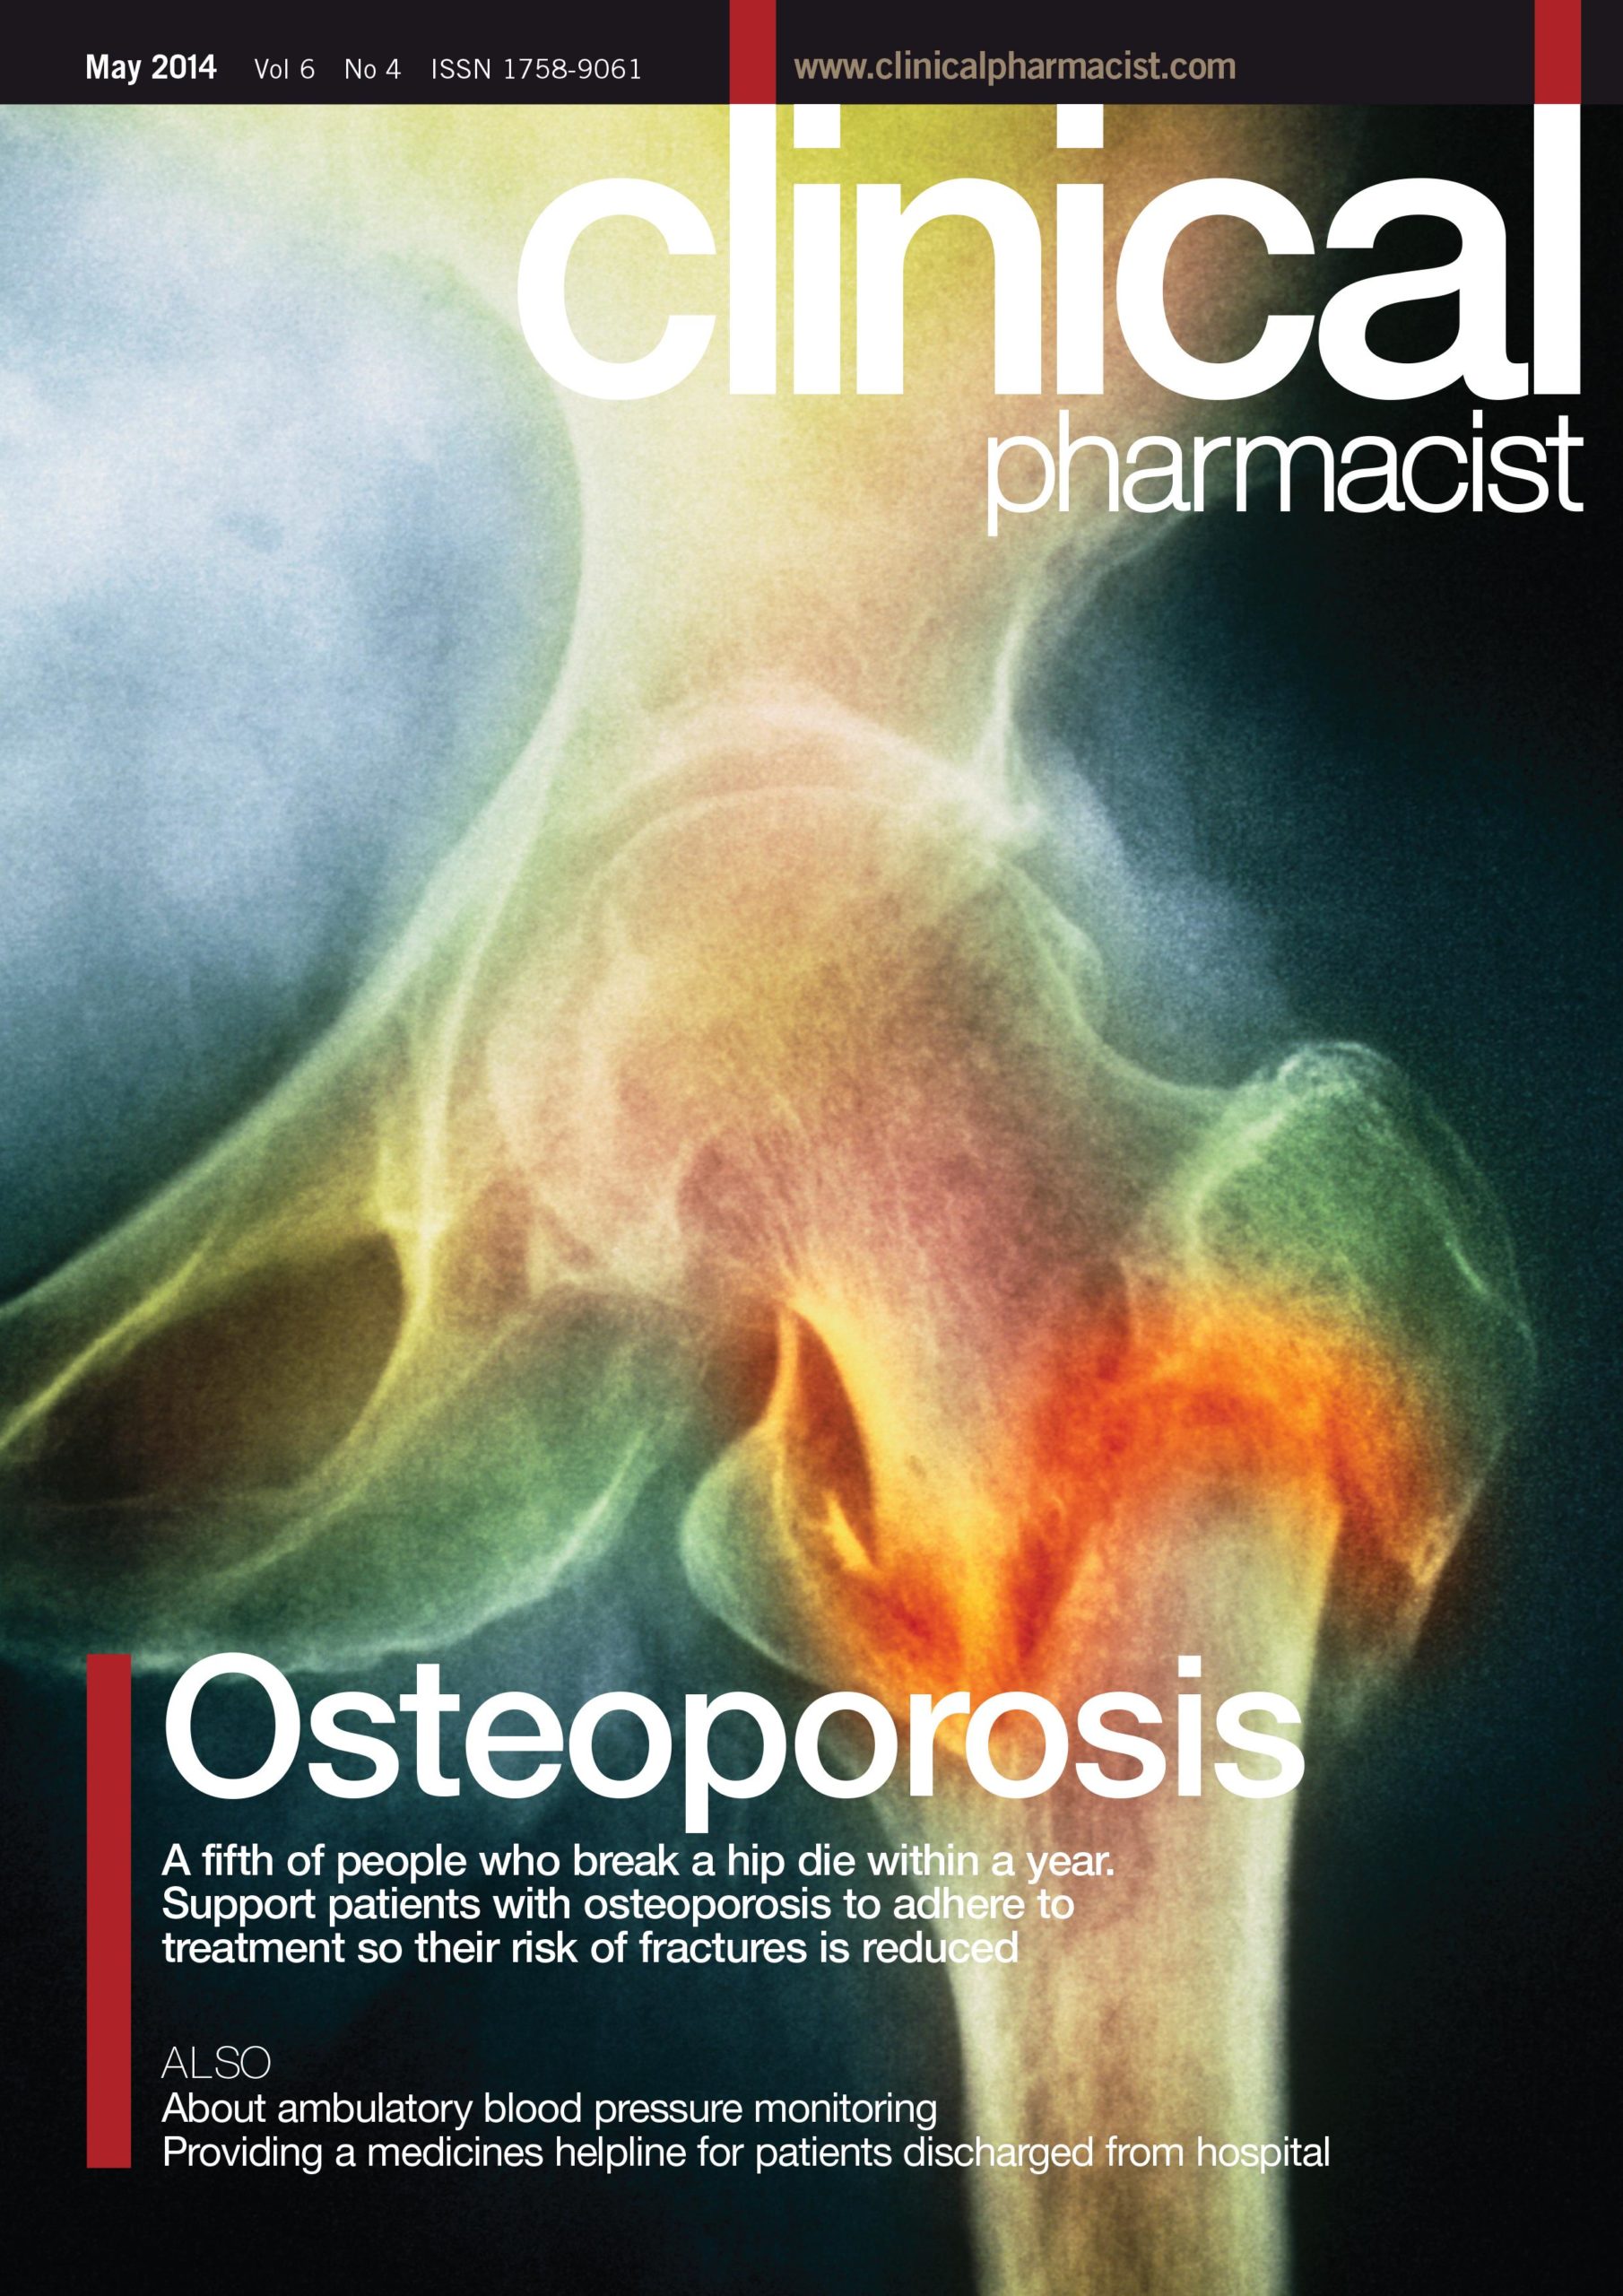 Publication issue cover for CP, May 2014, Vol 6, No 4